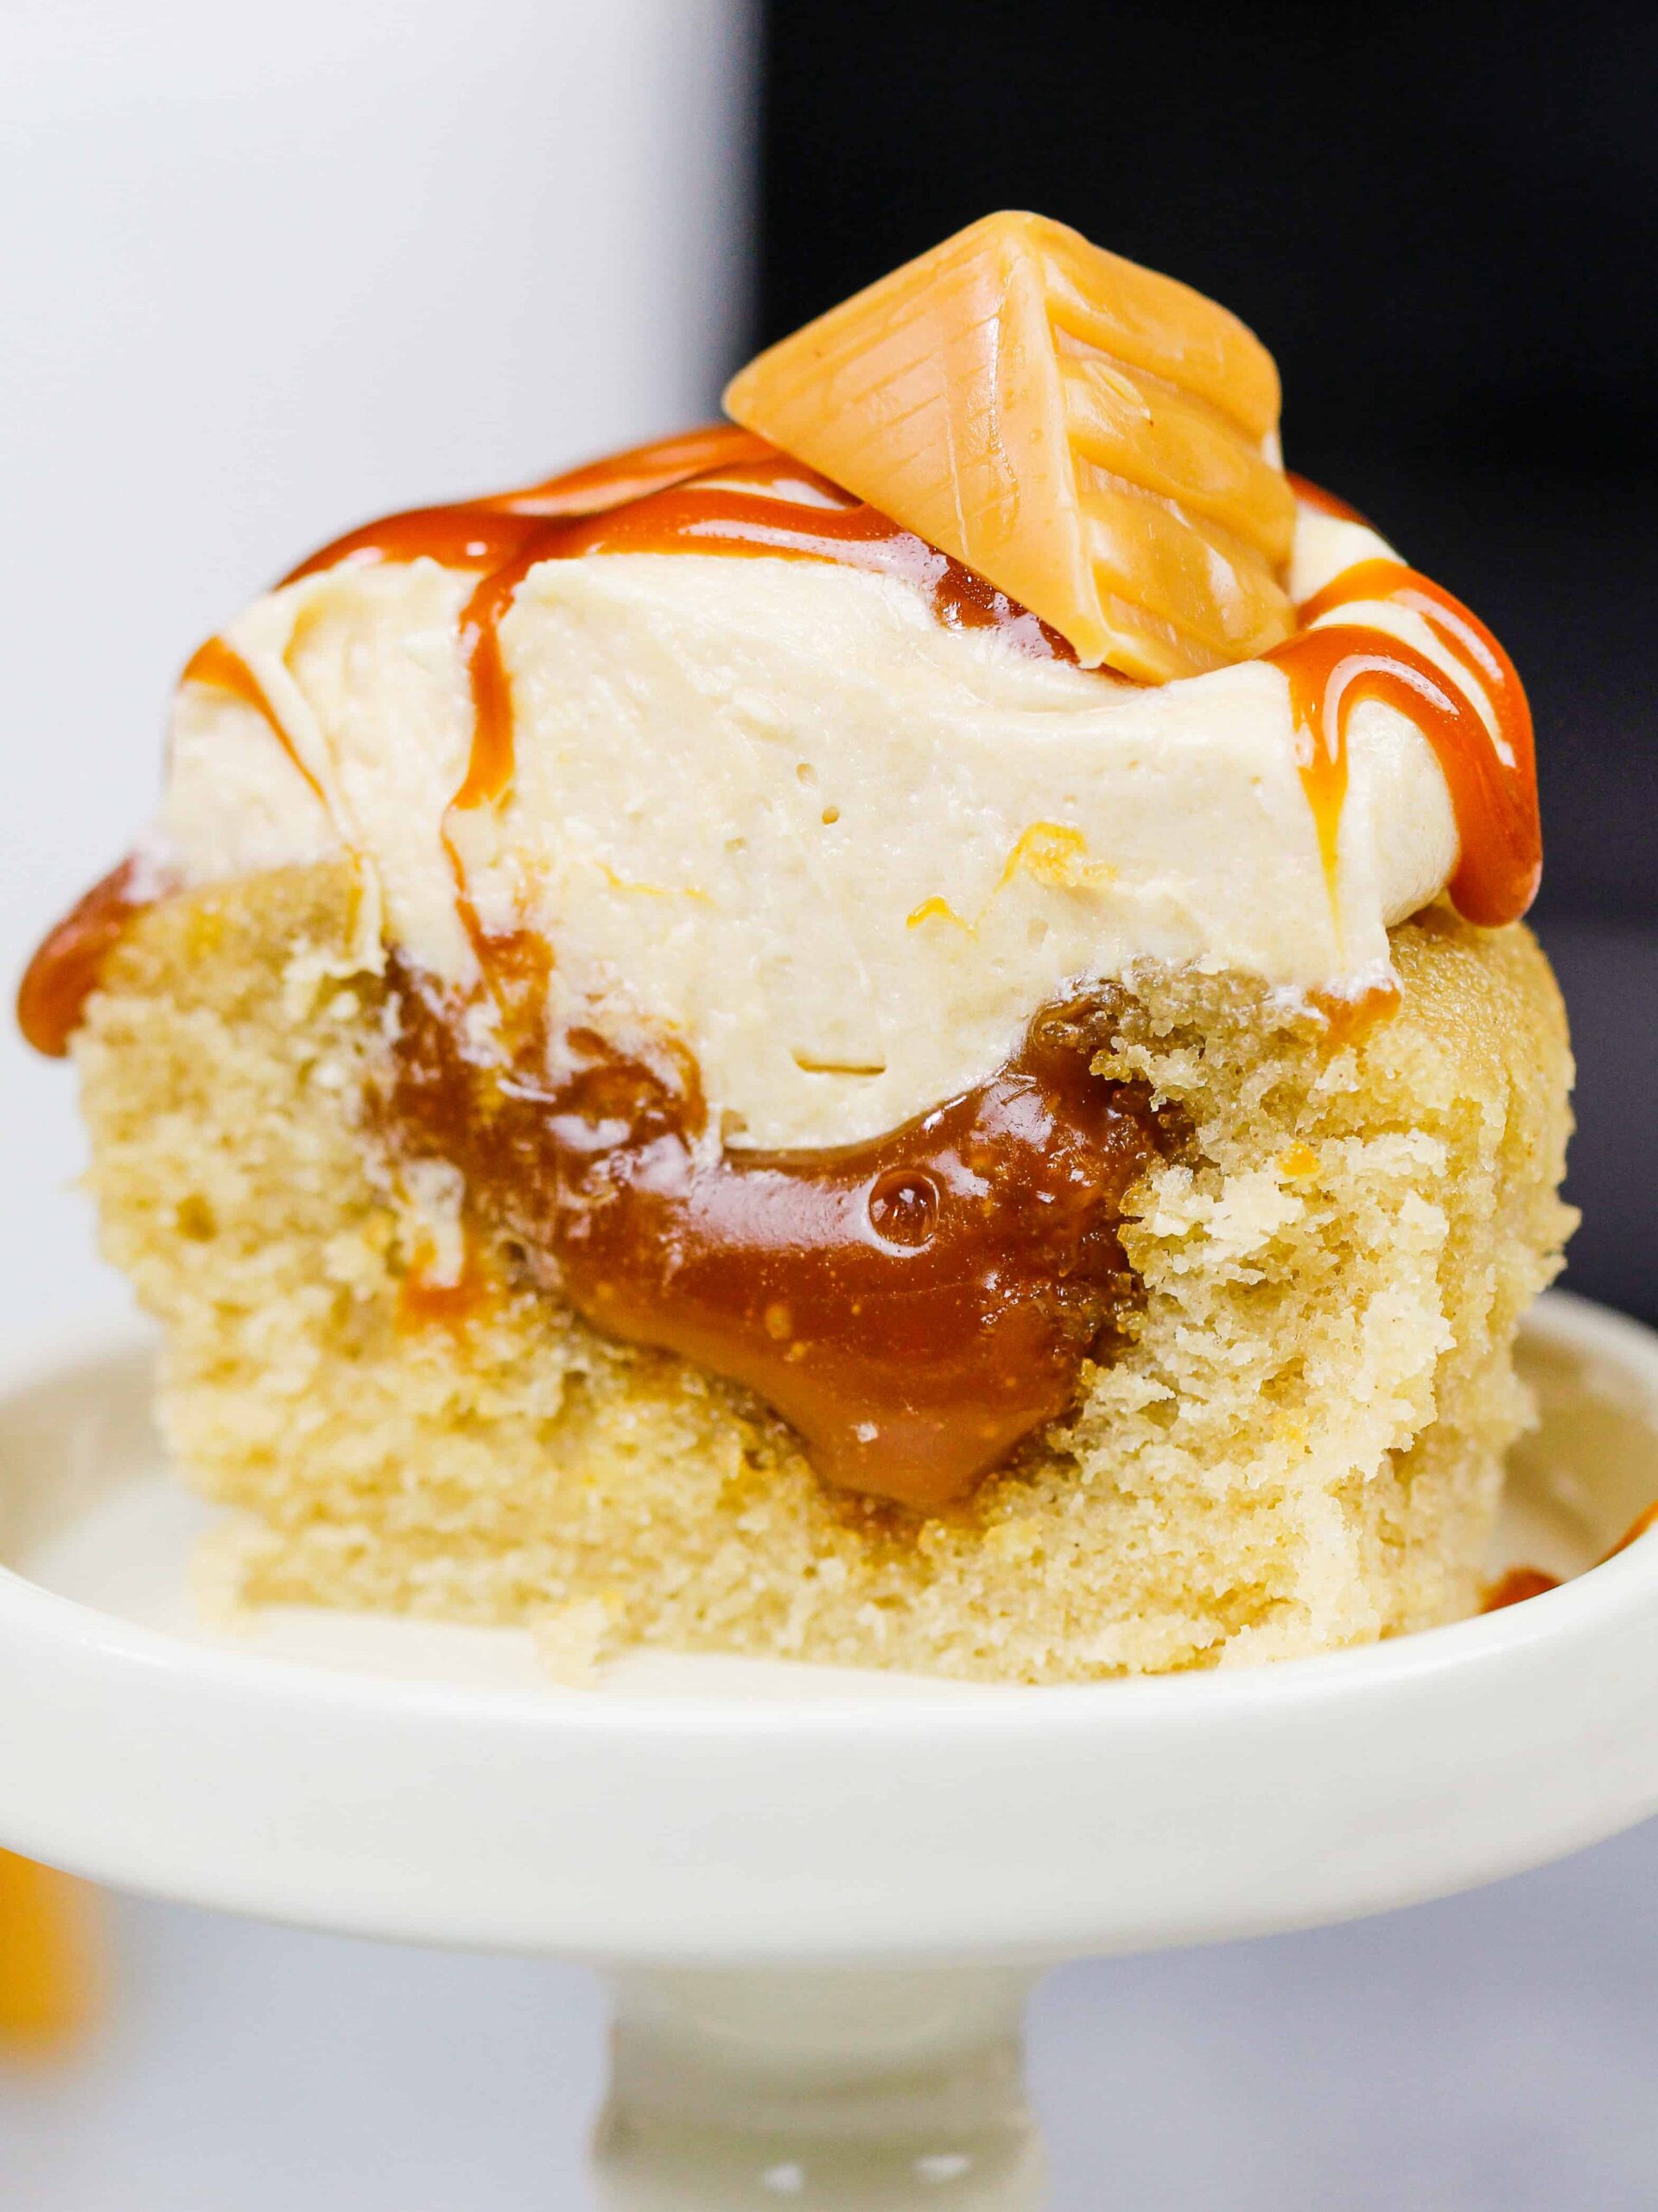 image of a caramel cupcake that's been cut in half to show it's gooey caramel filling